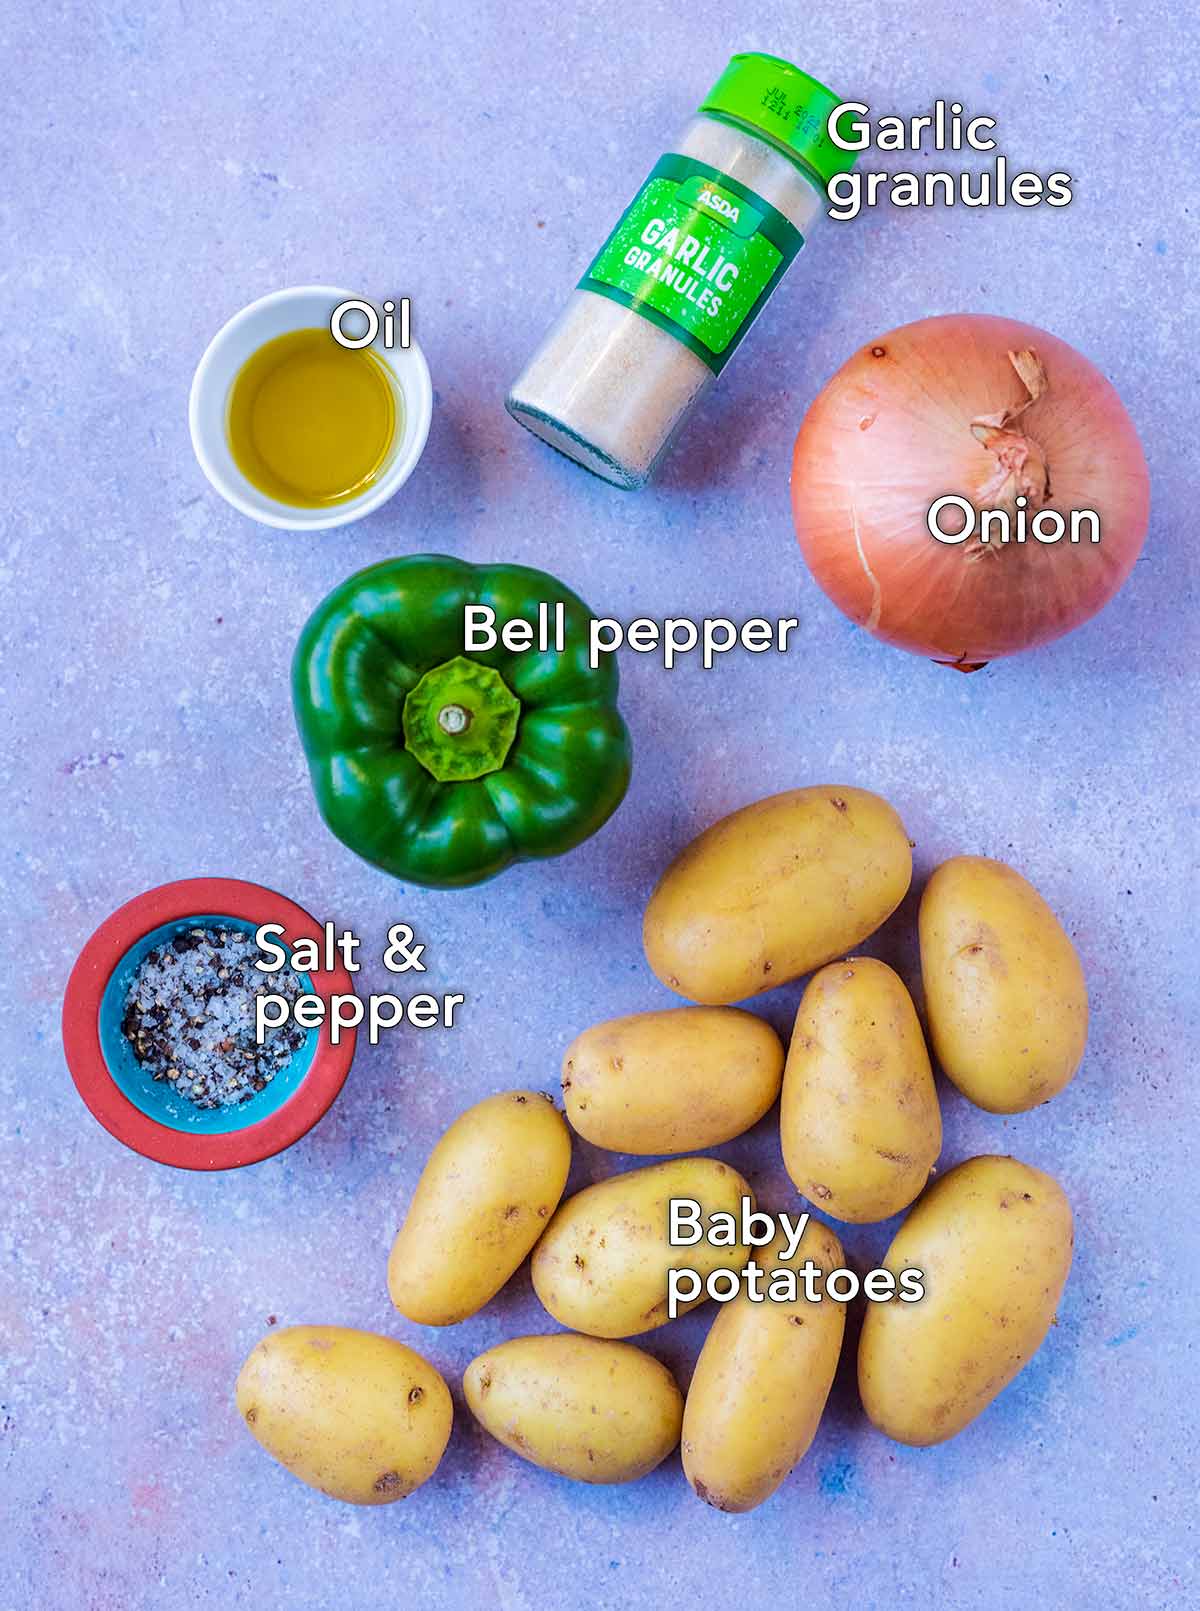 All the ingredients needed for this recipe with text overlay labels.